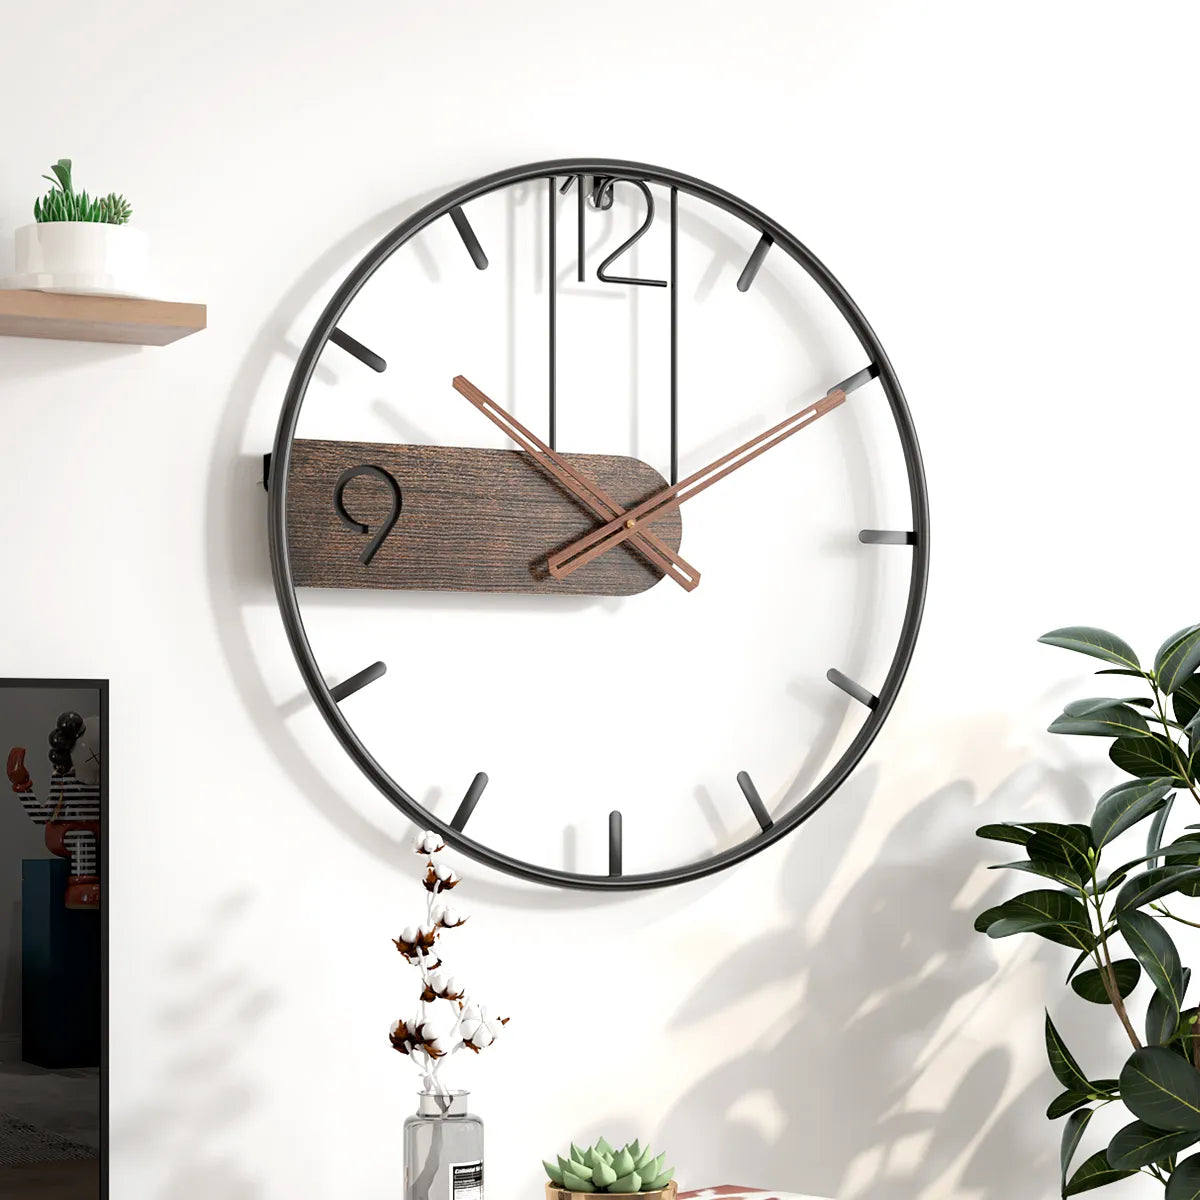 Iron Wall Clock Big Size 3D Nordic Metal Round Large Wall Watch Walnut Pionter Modern Clocks Decoration for Home Living Room